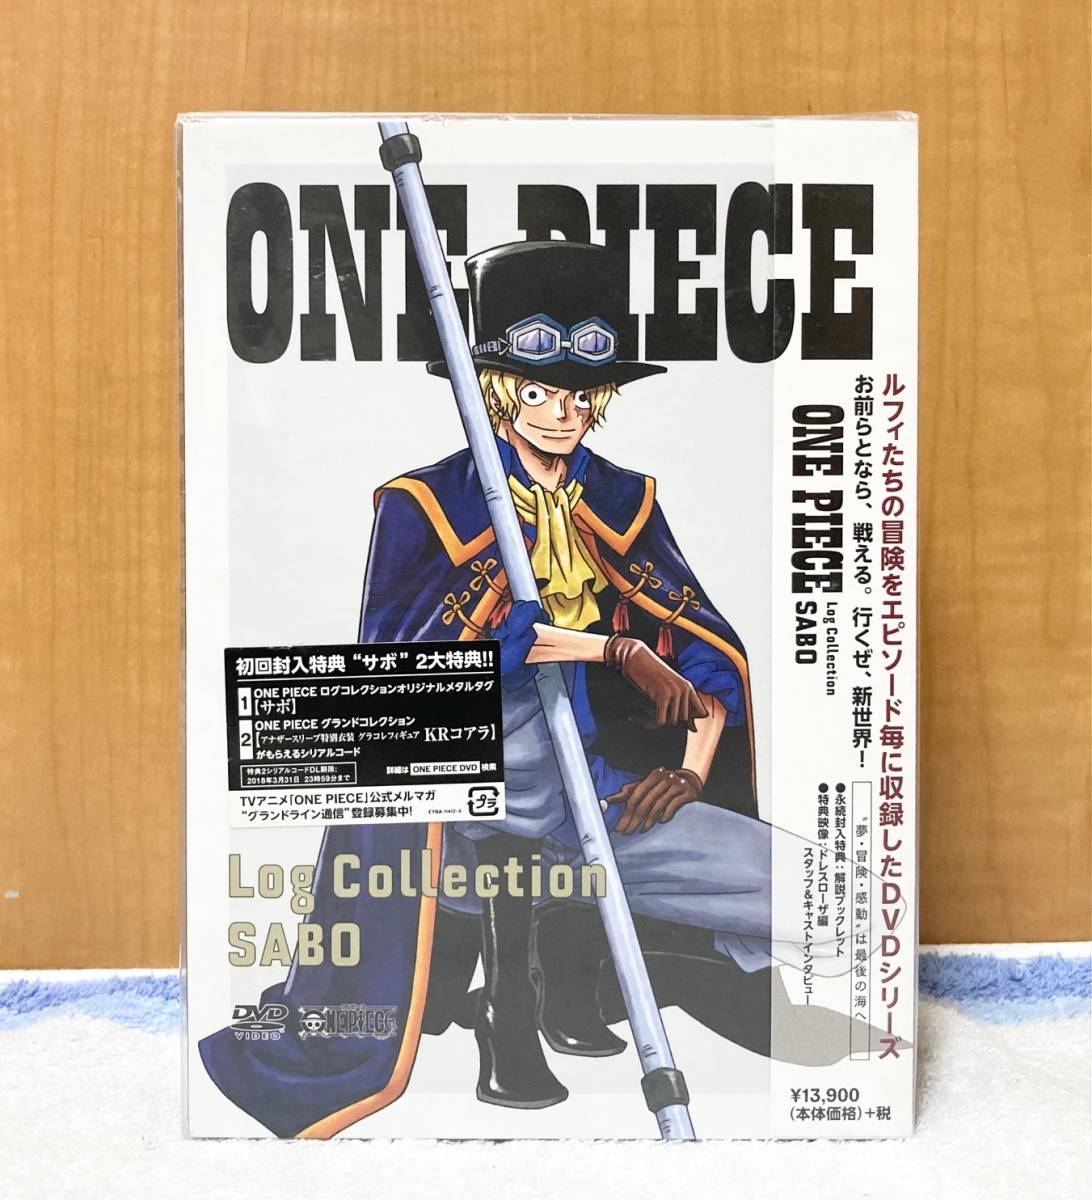 ONE PIECE Log Collection “SABO